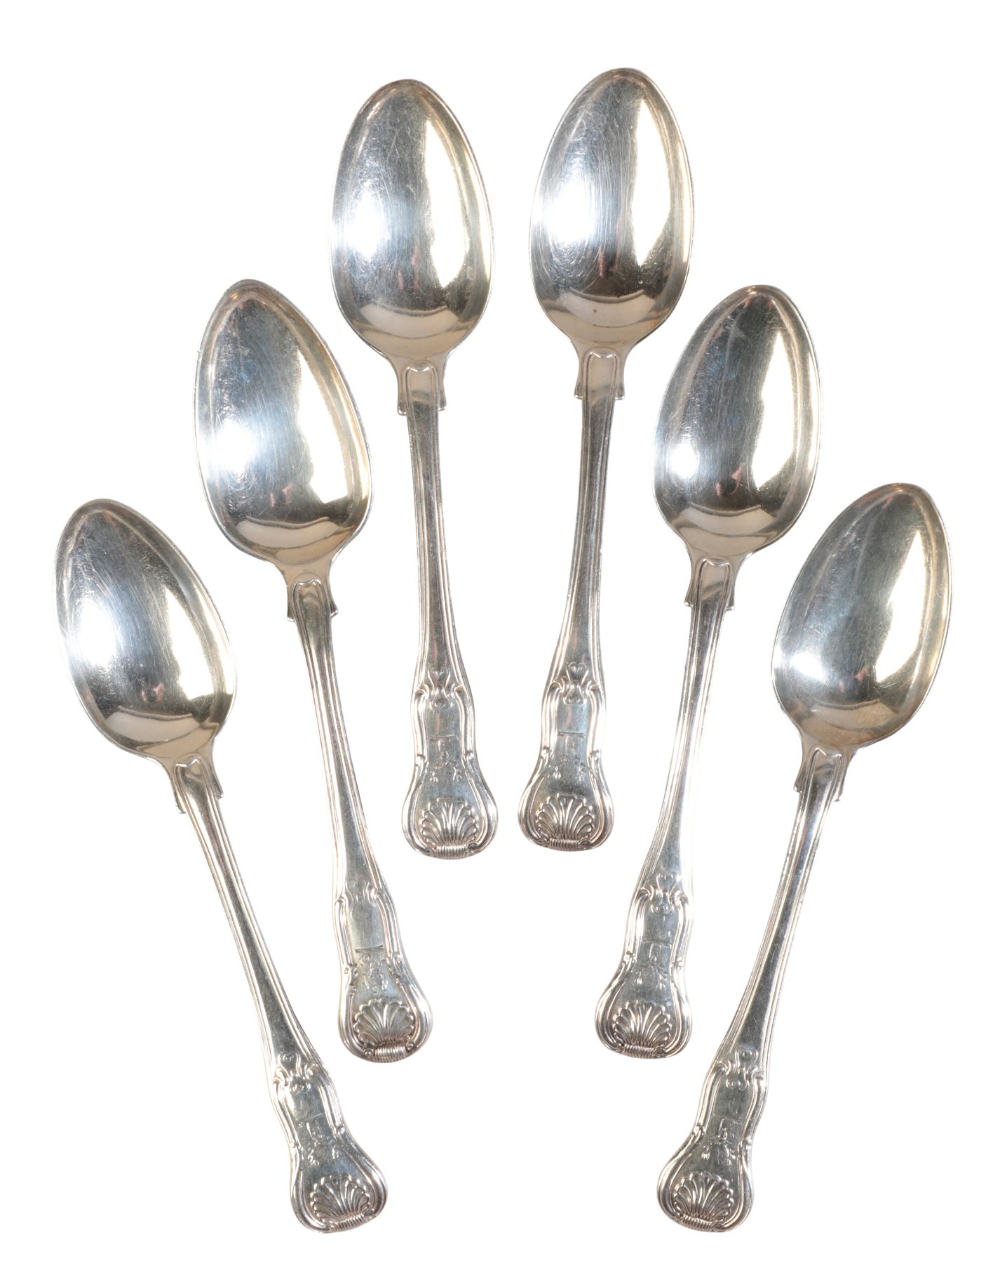 A SET OF SIX GEORGE IV SILVER HOURGLASS PATTERN DESSERT SPOONS